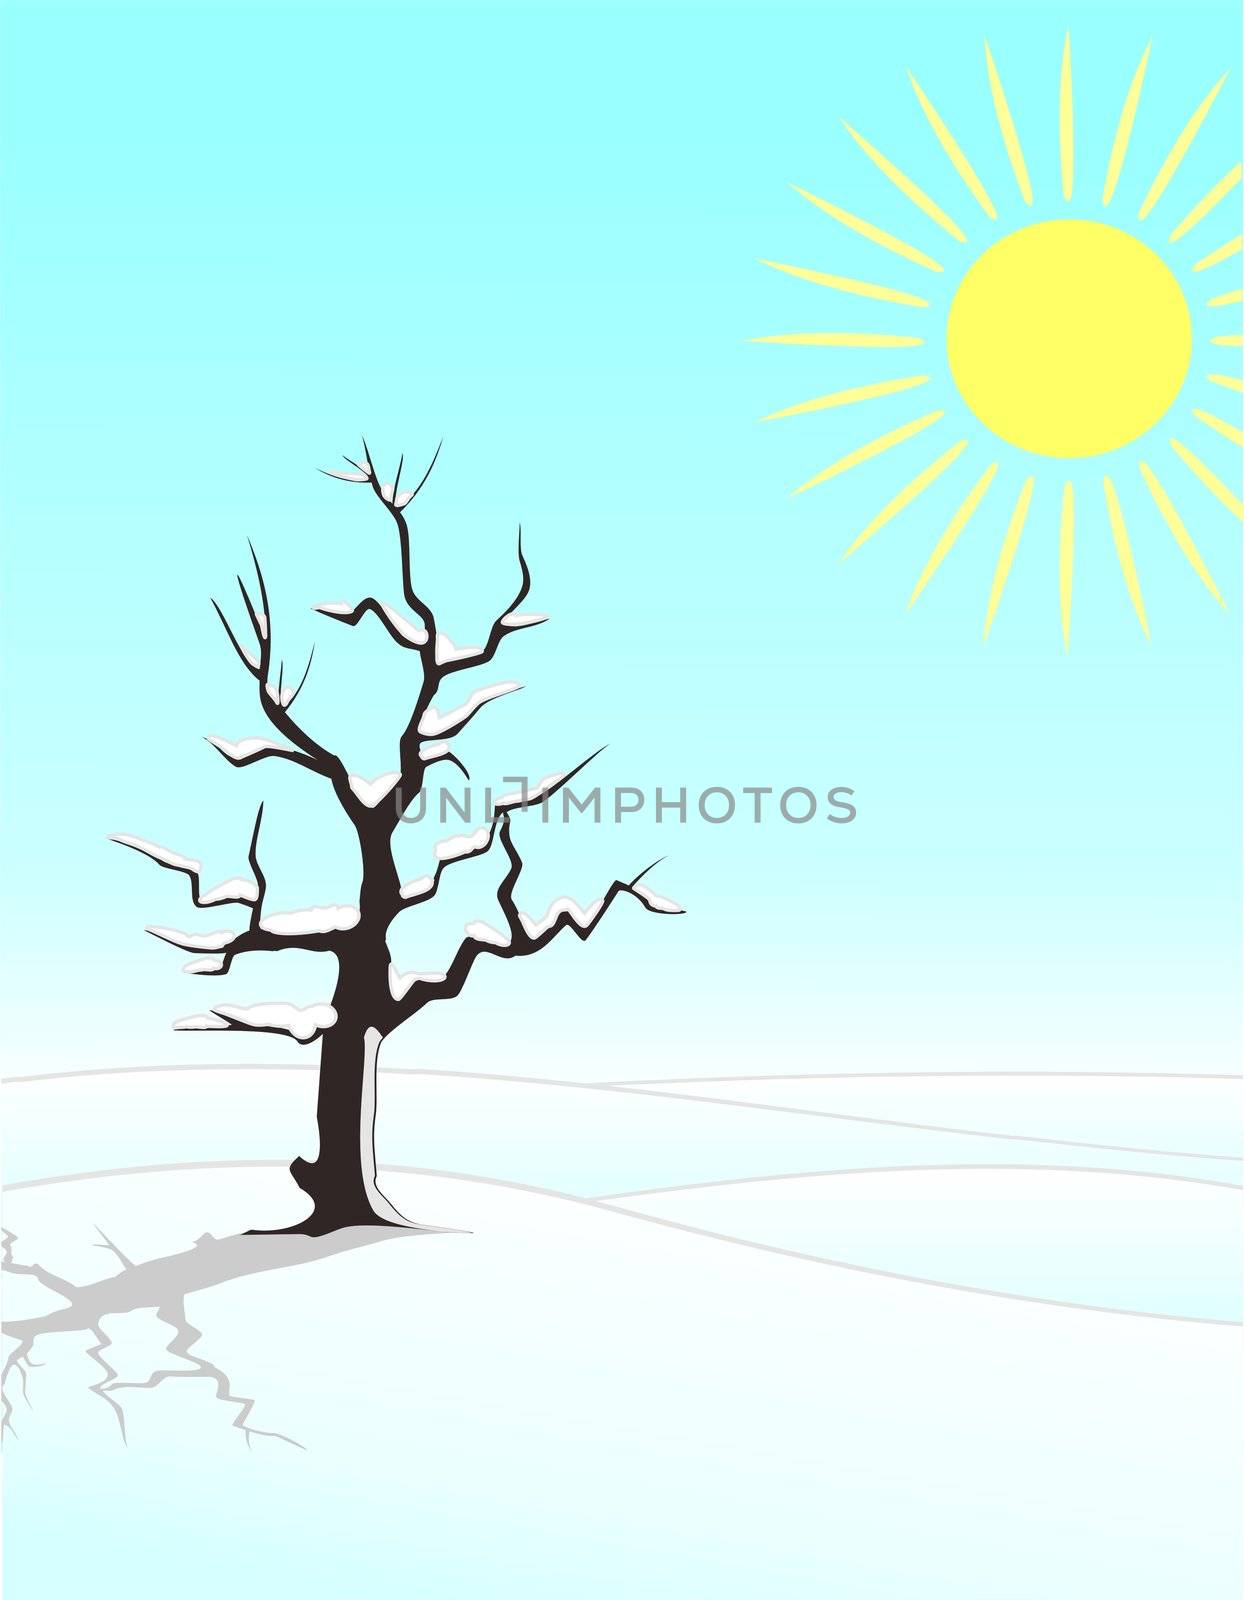 four seasons illustration: winter
single tree in the fields with snow